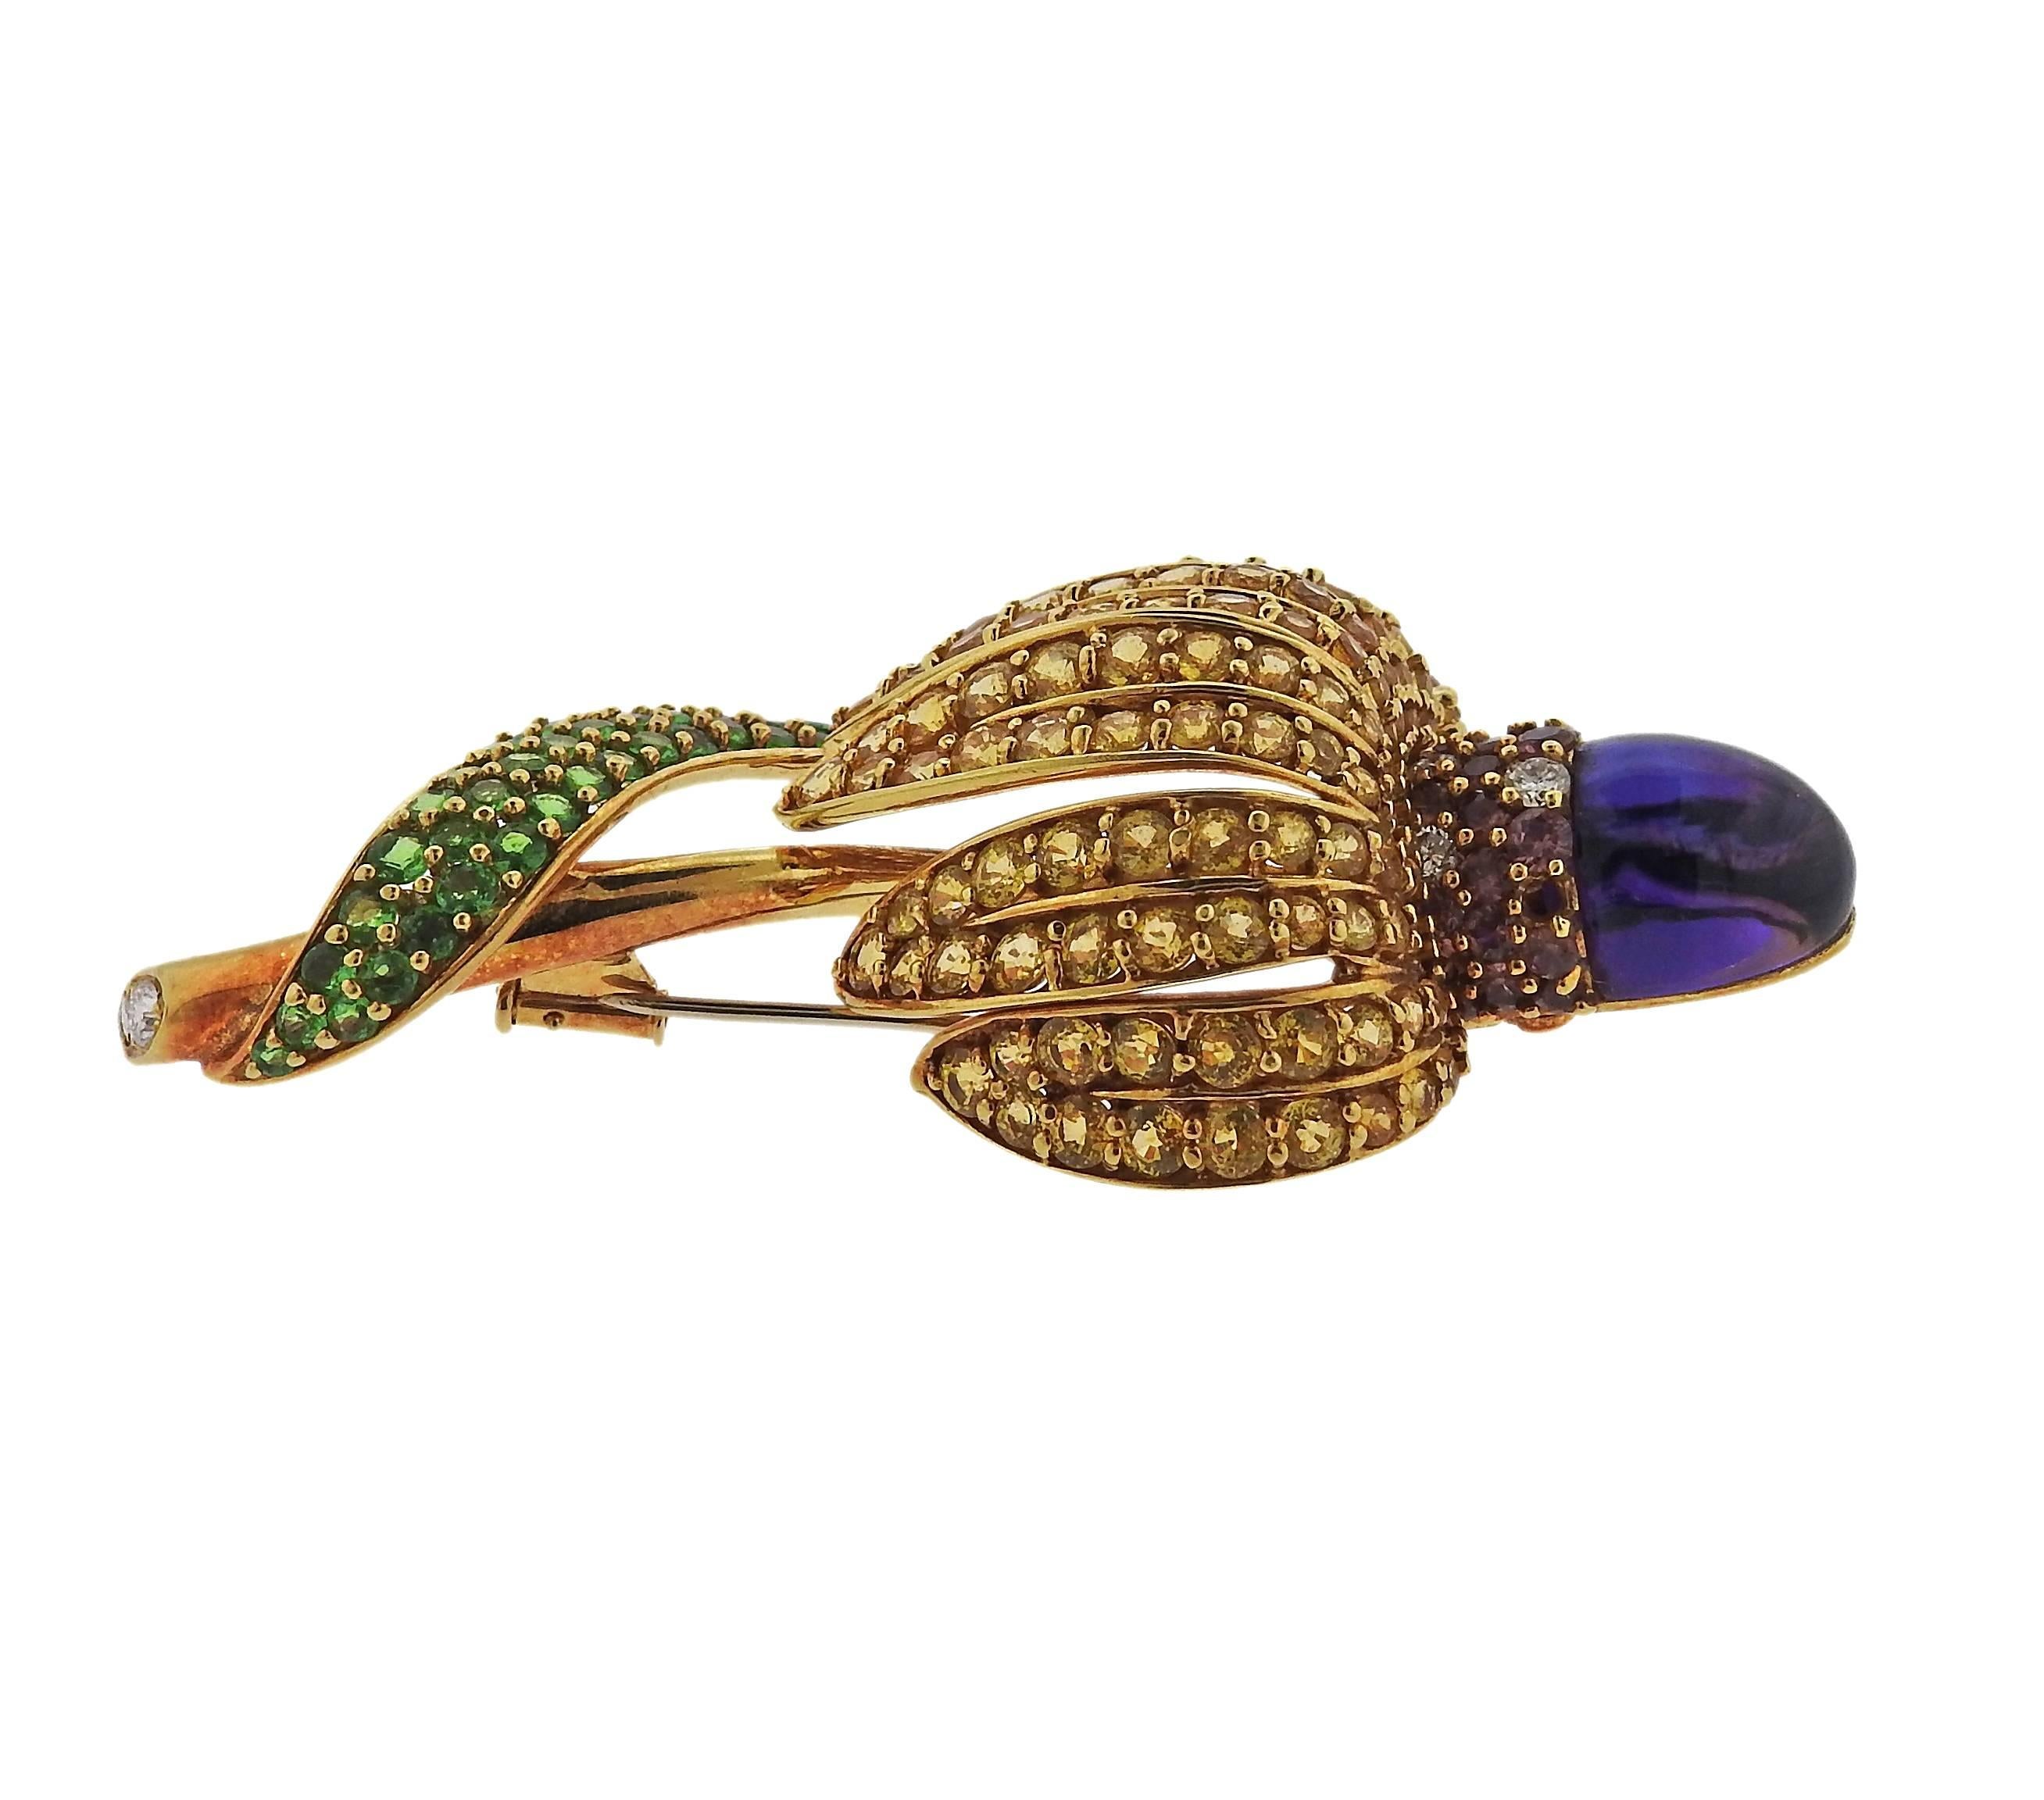 Colorful 18k yellow gold brooch and earrings set, crafted in circa 1983 by Tiffany & Co, decorated with tsavorites, amethyst cabochons, yellow and pink sapphires, approximately 0.60ctw in G/VS diamonds. Brooch is 75mm x 37mm, earrings measure